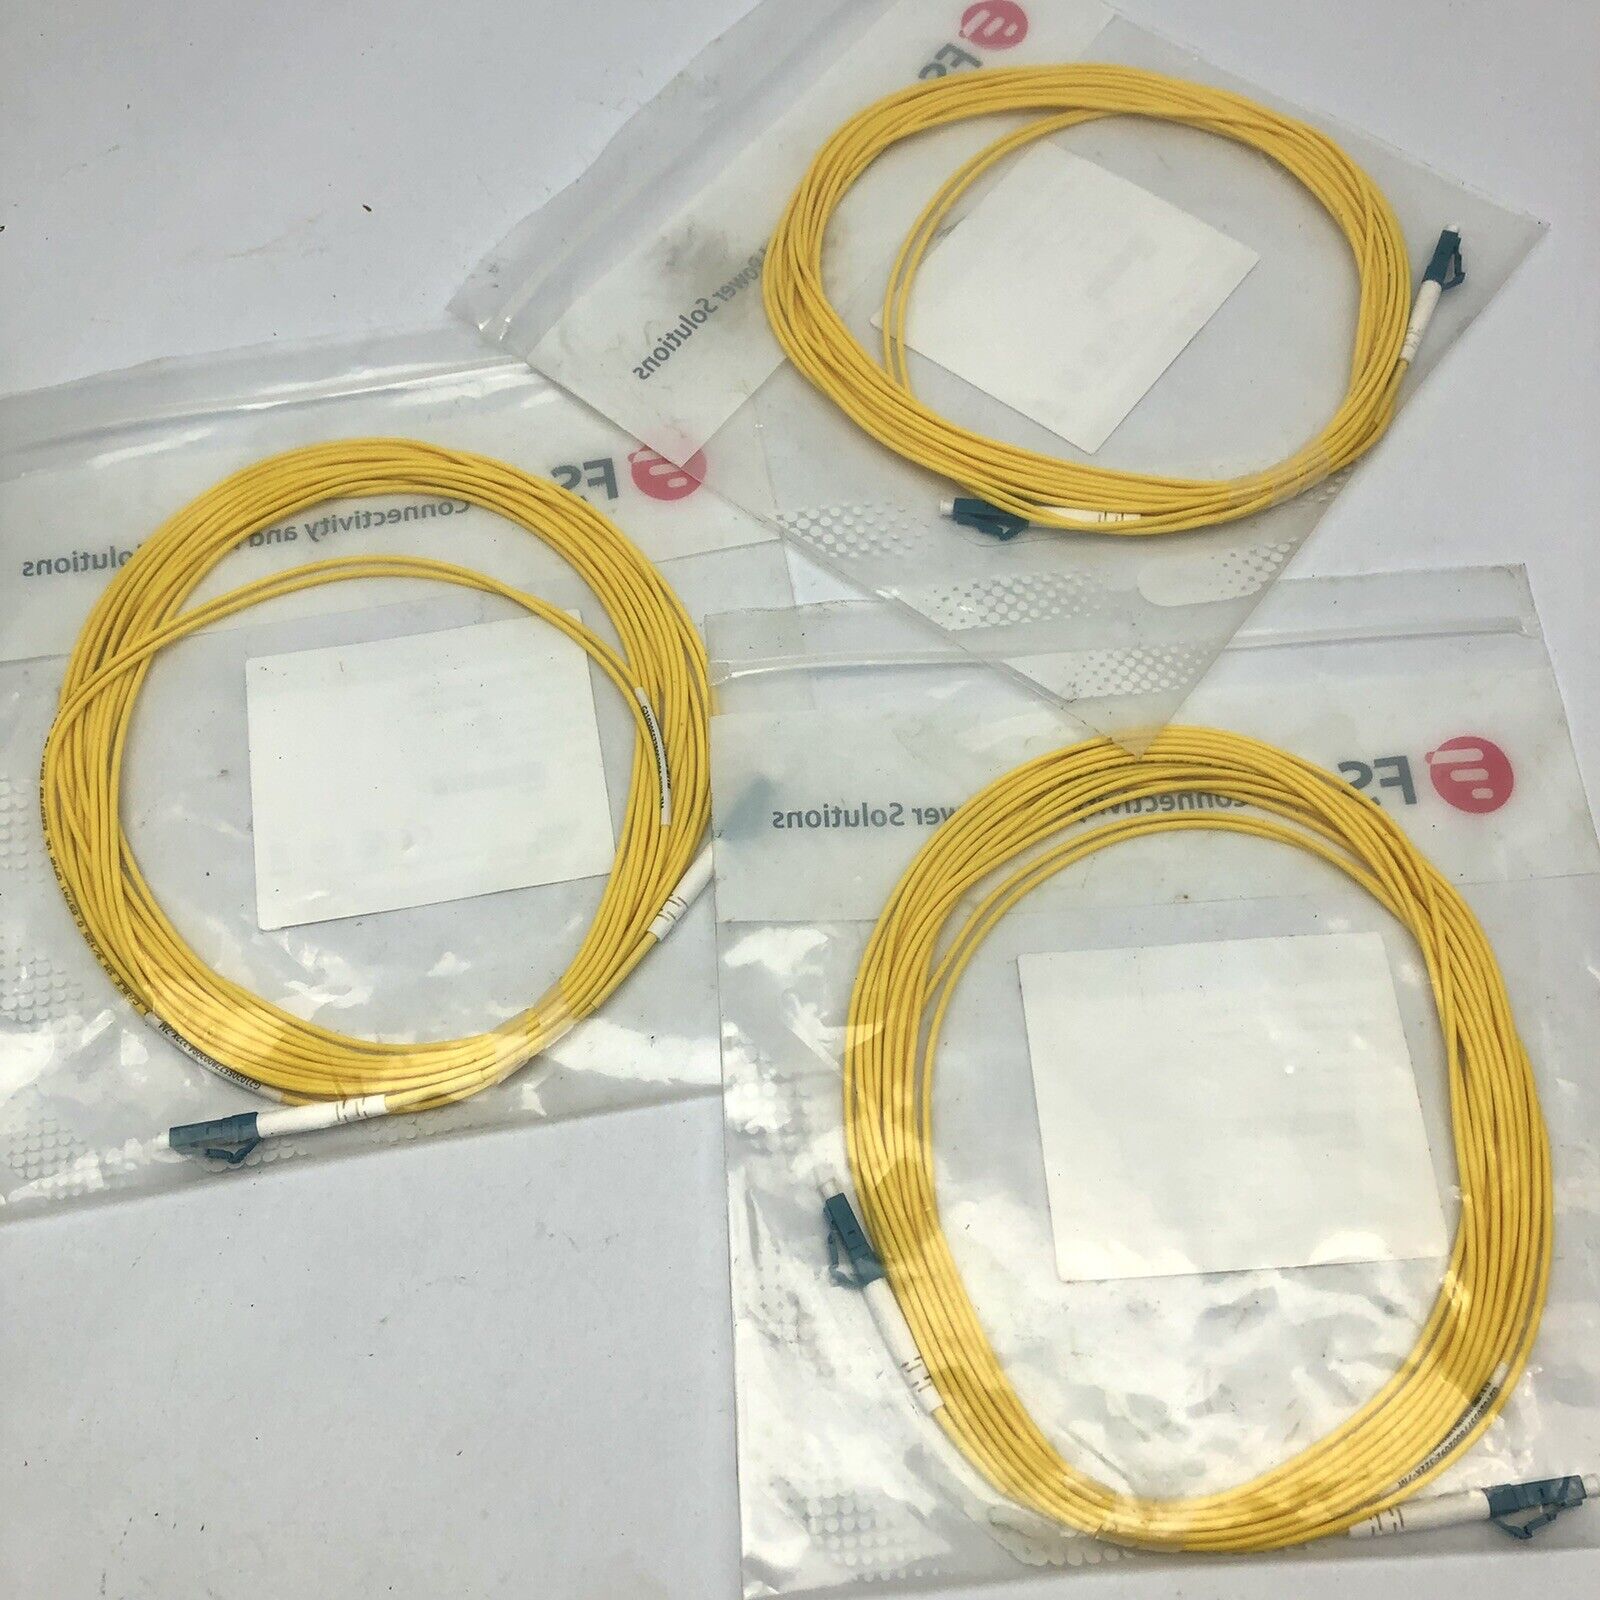 QTY 3 FS -7M 9/125 SINGLE MODE FIBER PATCH CABLE CONNECTOR LC/UPC-LC/UPS SIMPLEX